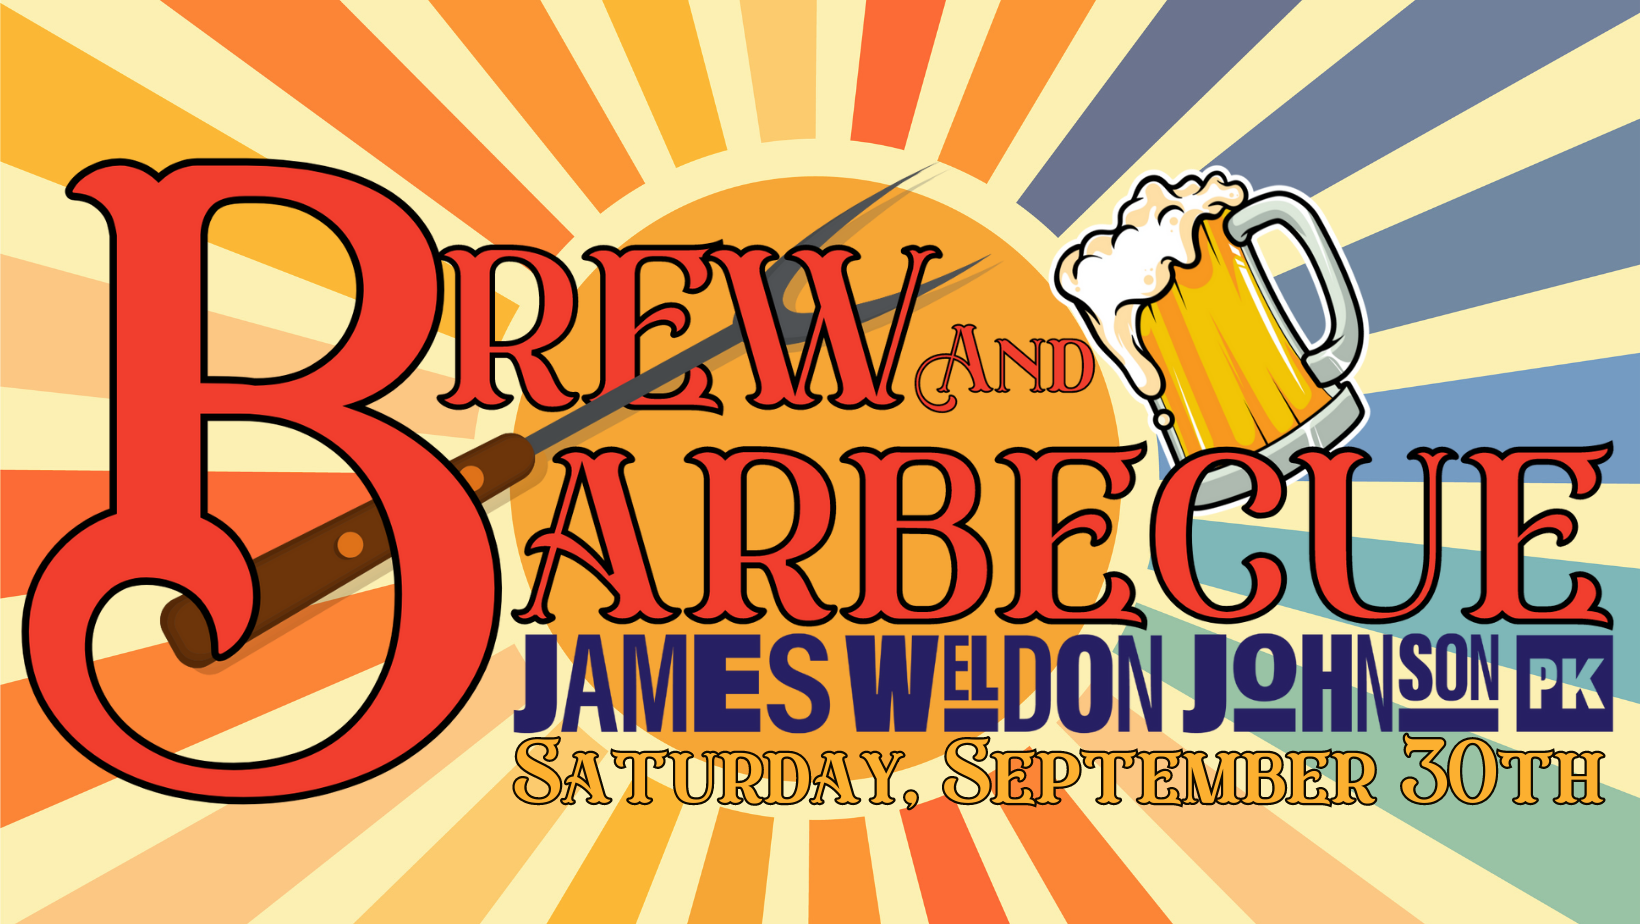 Bluegrass, Beer, and Barbecue is now Brew & BBQ at James Weldon Johnson